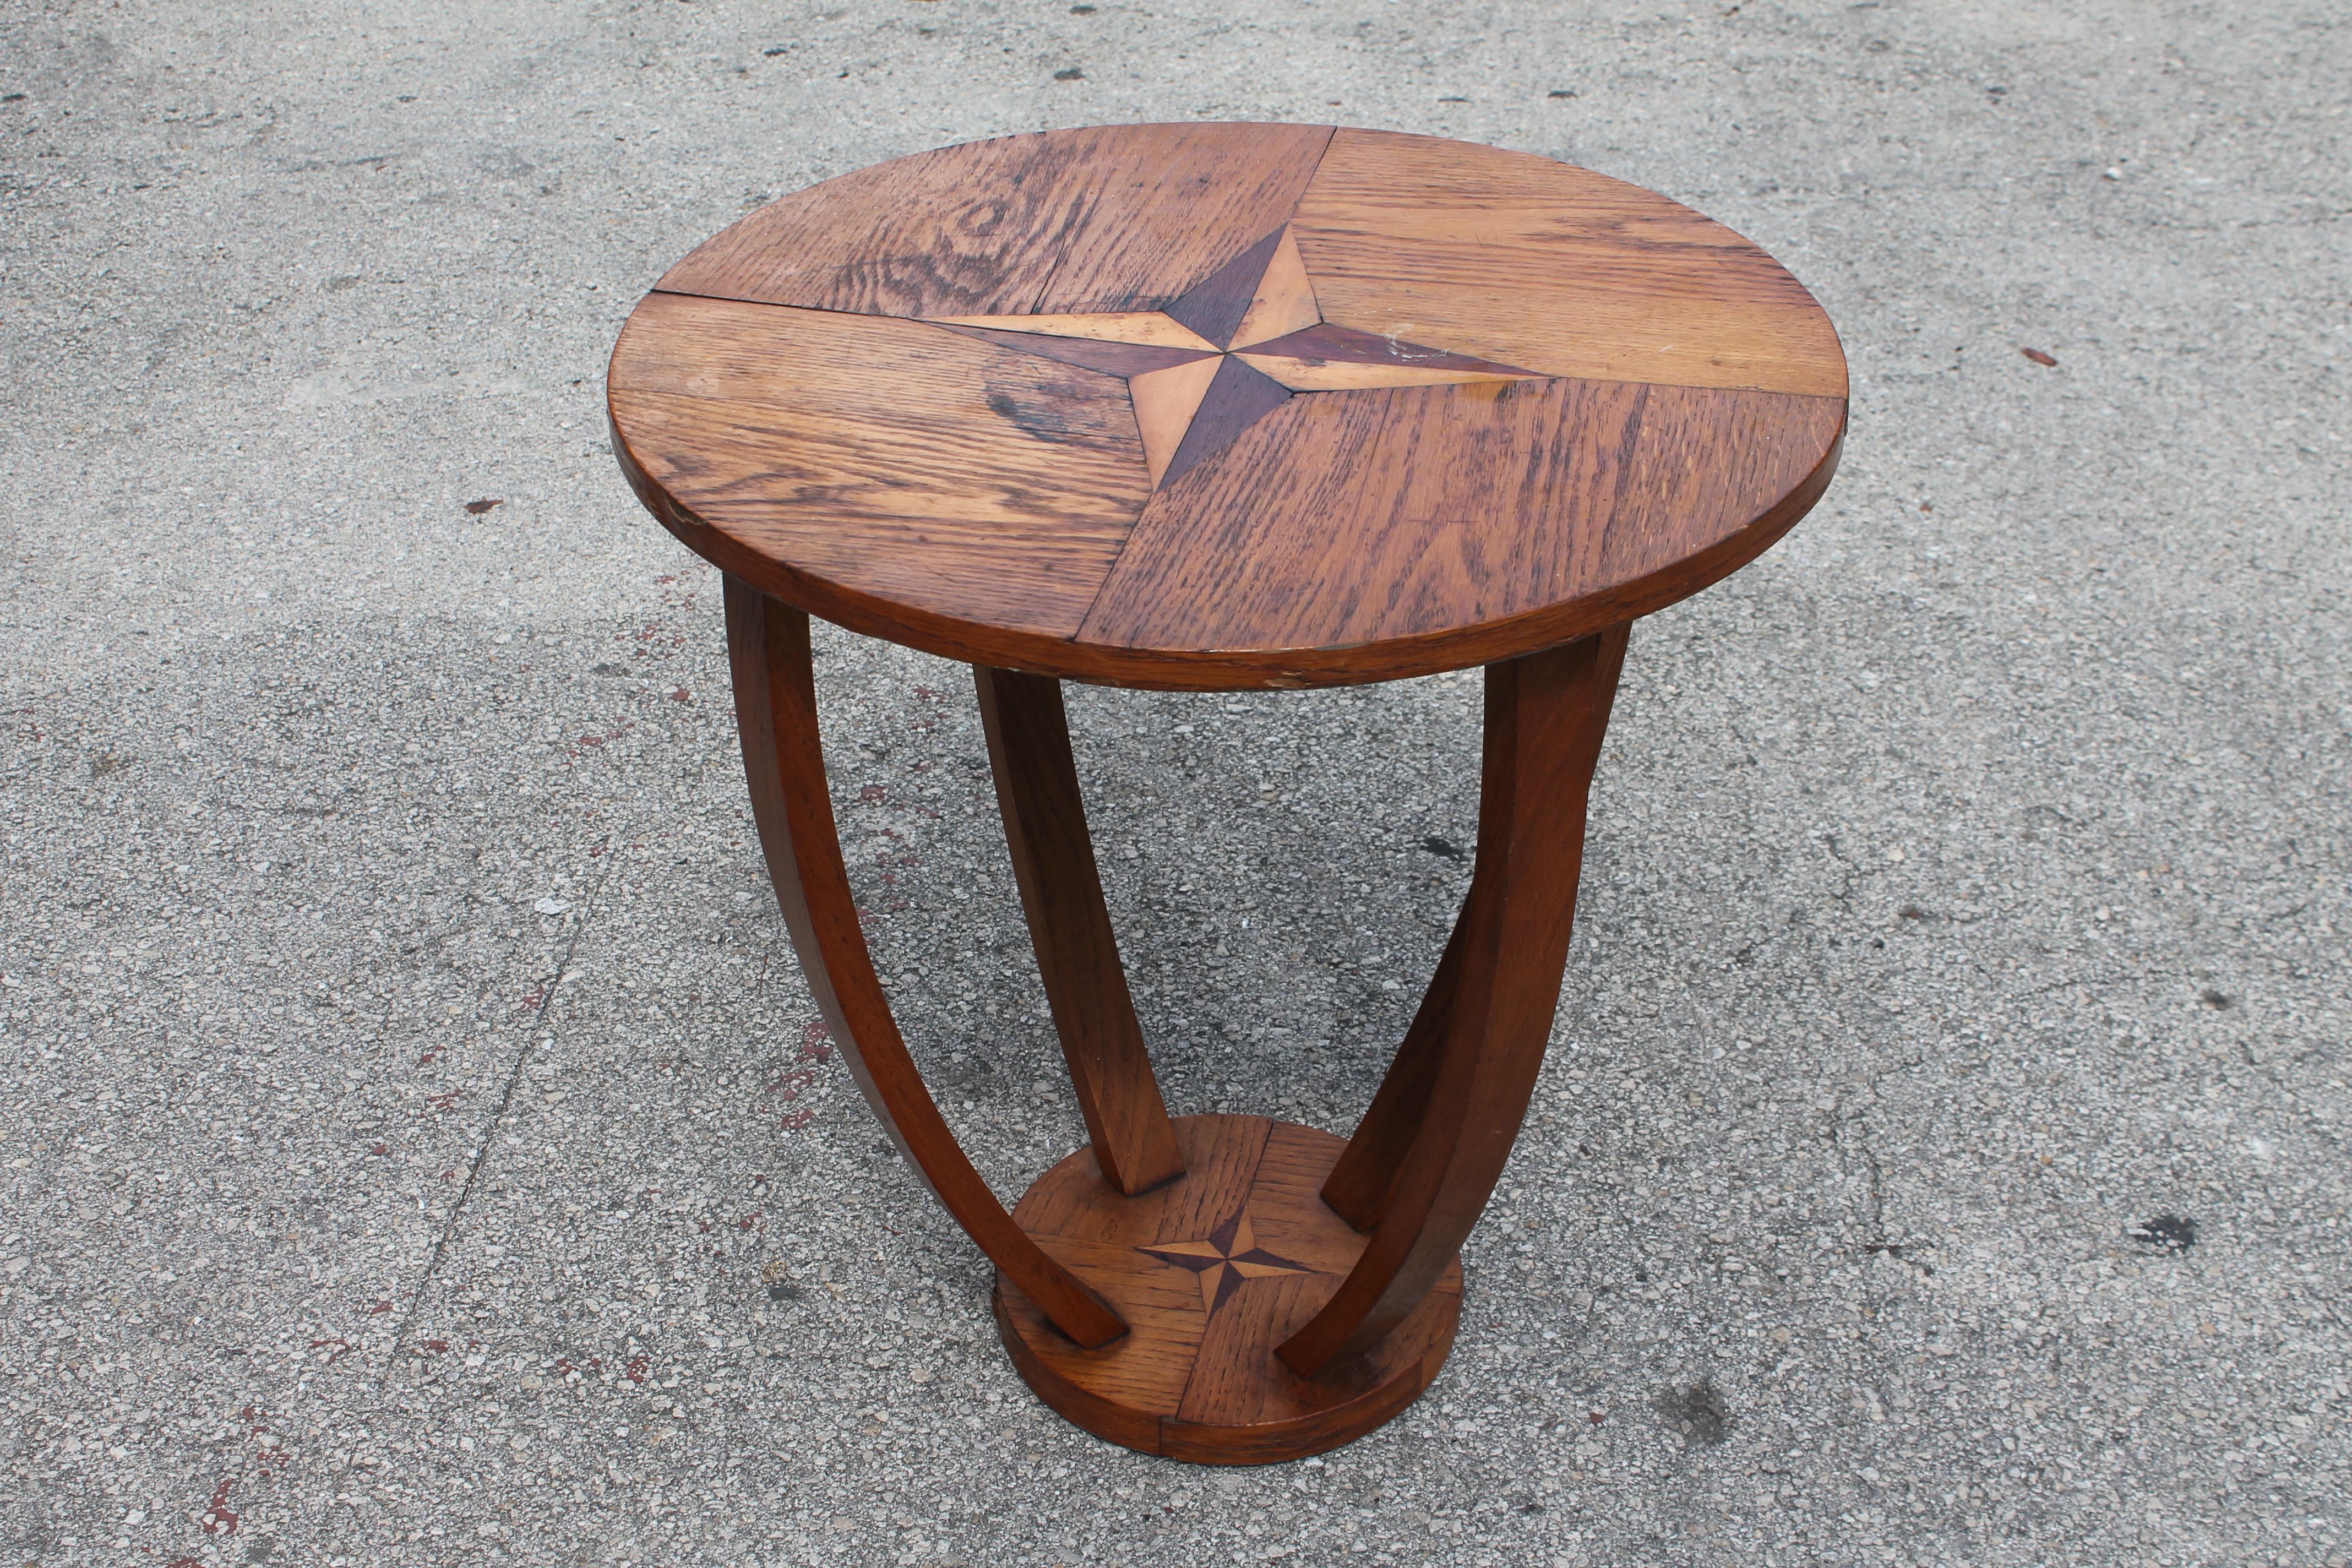 1930s French Art Deco Round Side/ Accent Table with Compass Inlay Detail In Good Condition For Sale In Opa Locka, FL